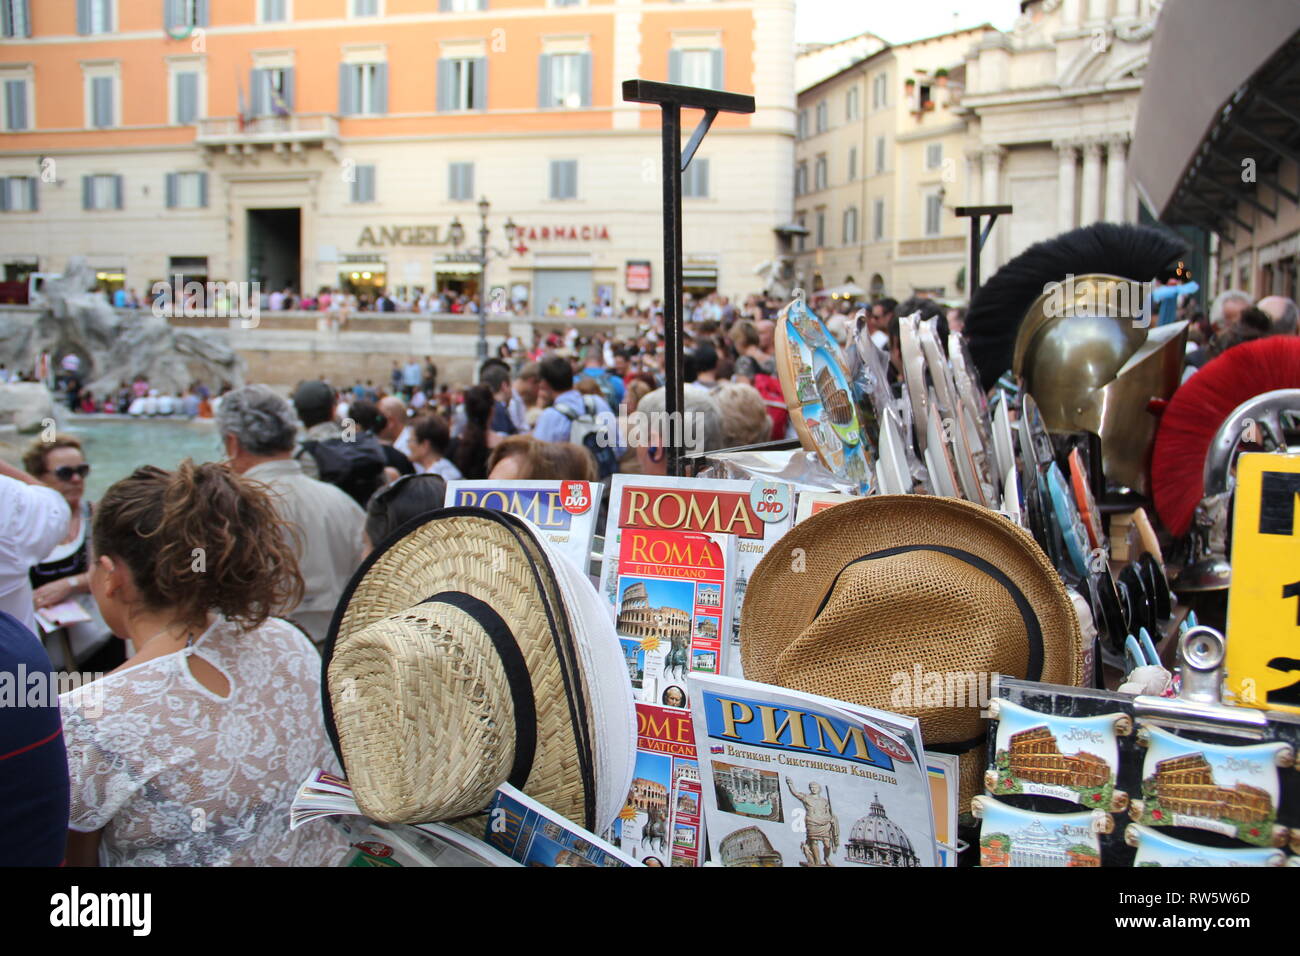 Souvenirs on sale at Trevi Fountain, Rome Stock Photo